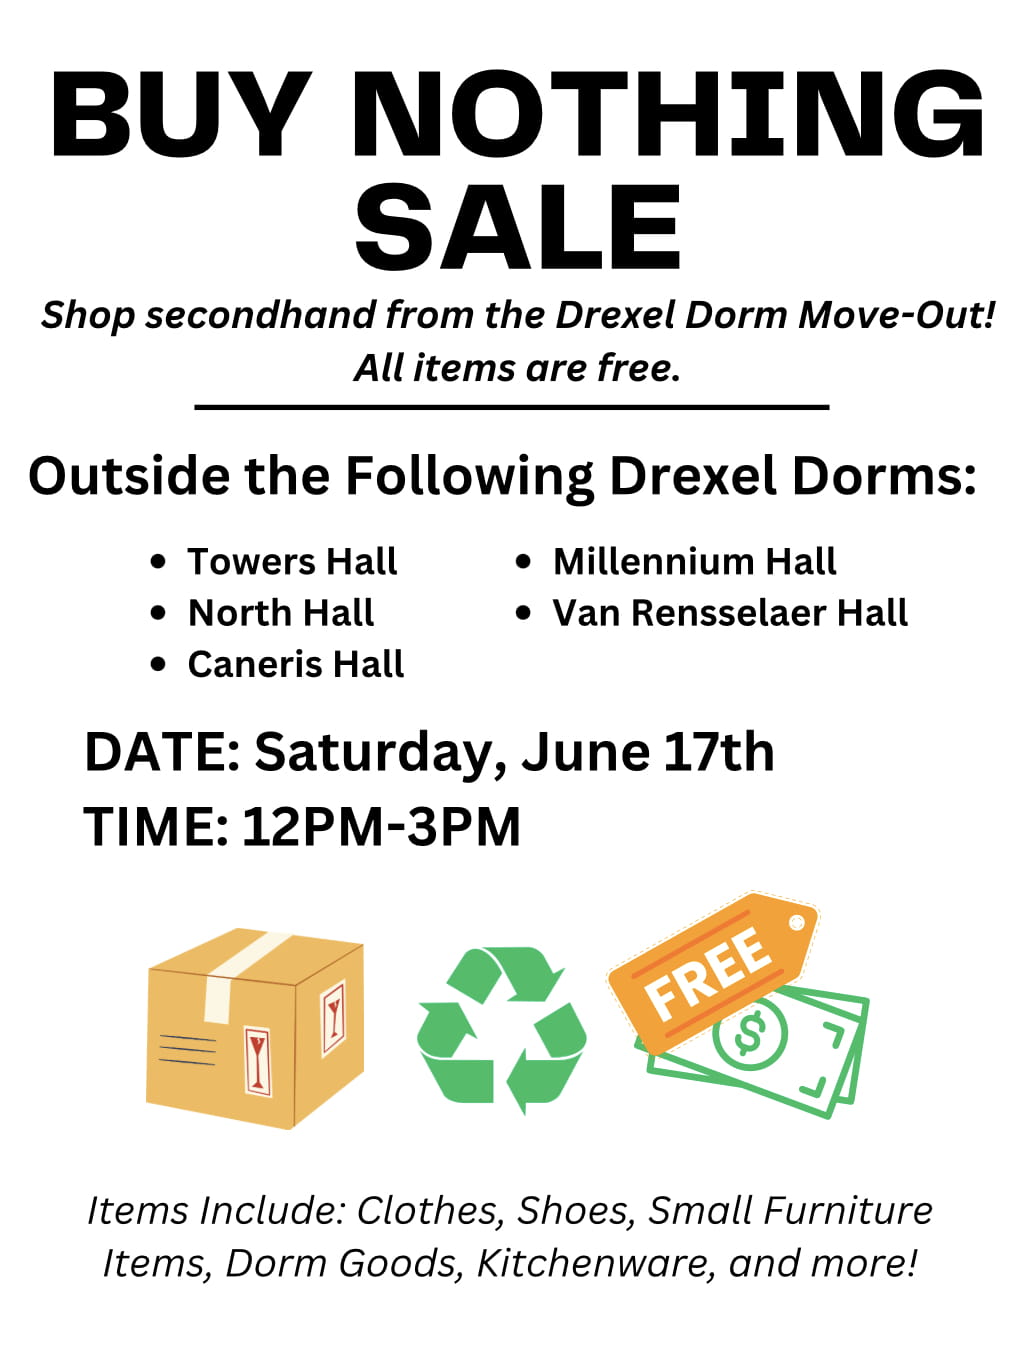 Buy nothing sale outside Towers, North, Caneris, Millennium and Van Renssaeler Halls on June 17 from noon to 3 p.m.